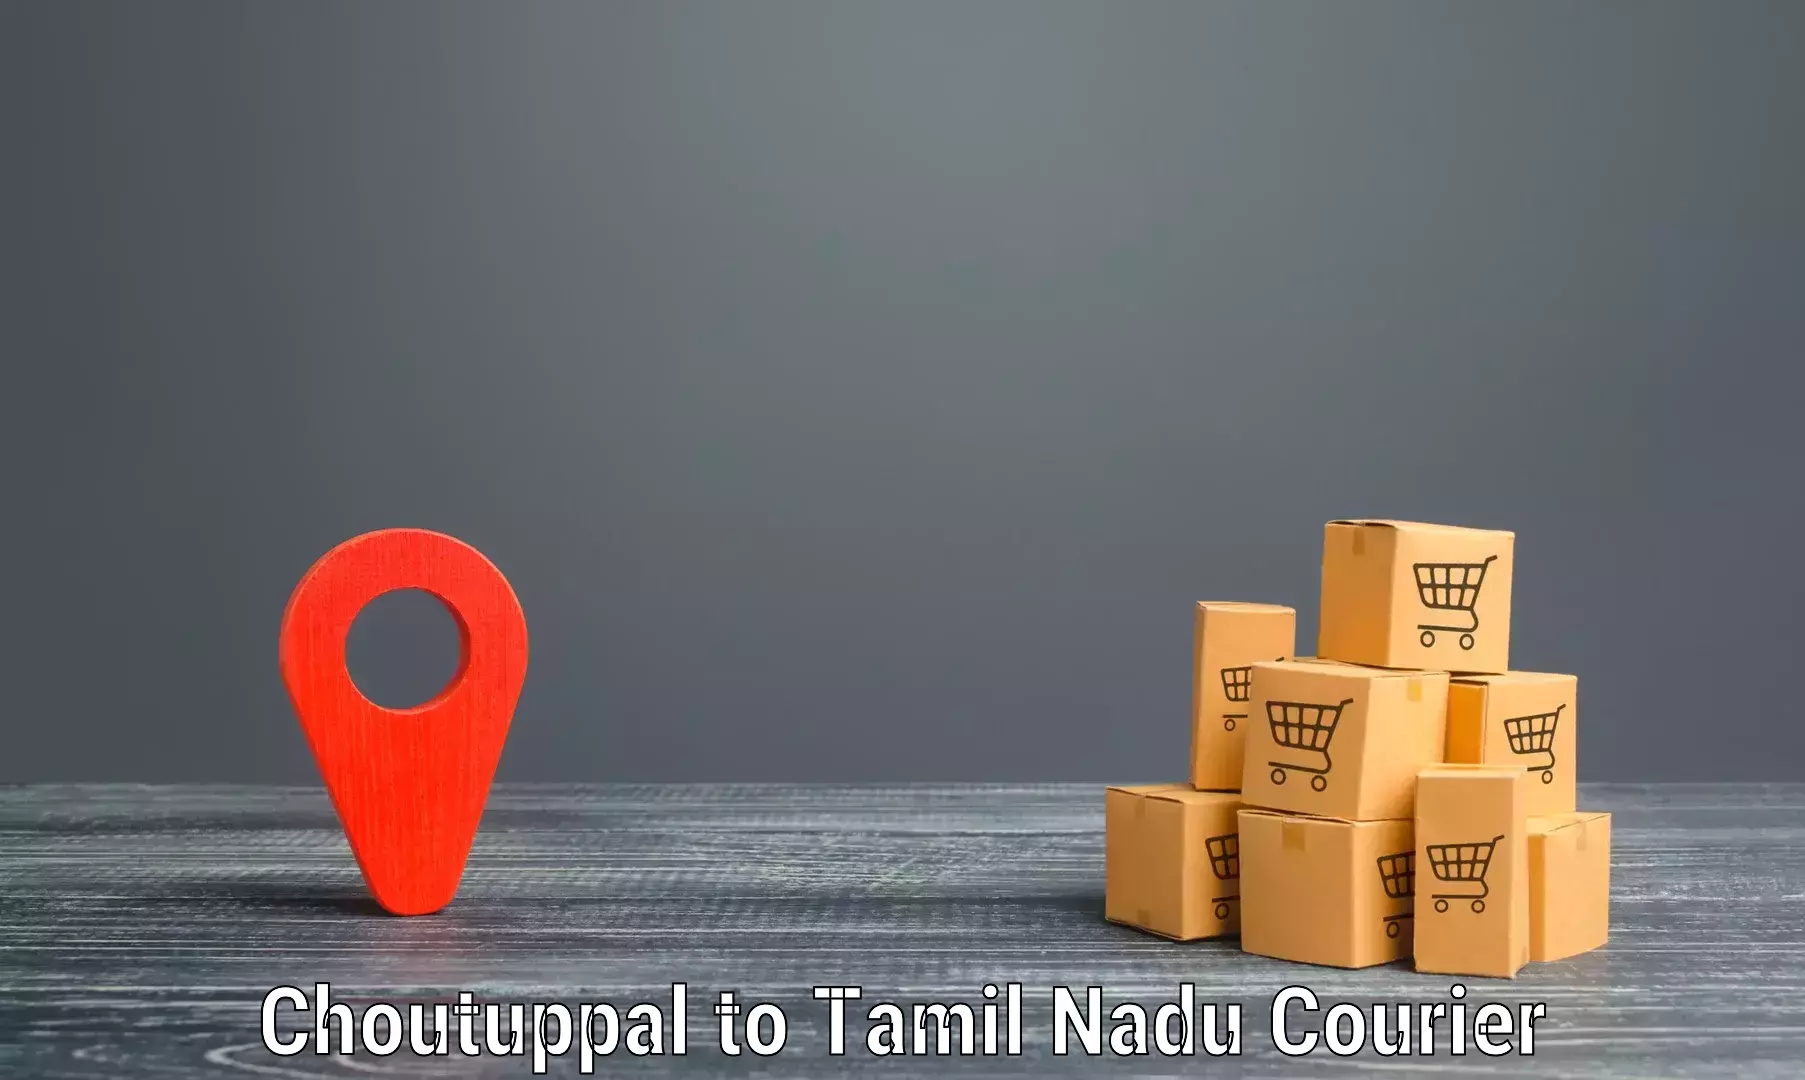 Trackable shipping service Choutuppal to Cuddalore